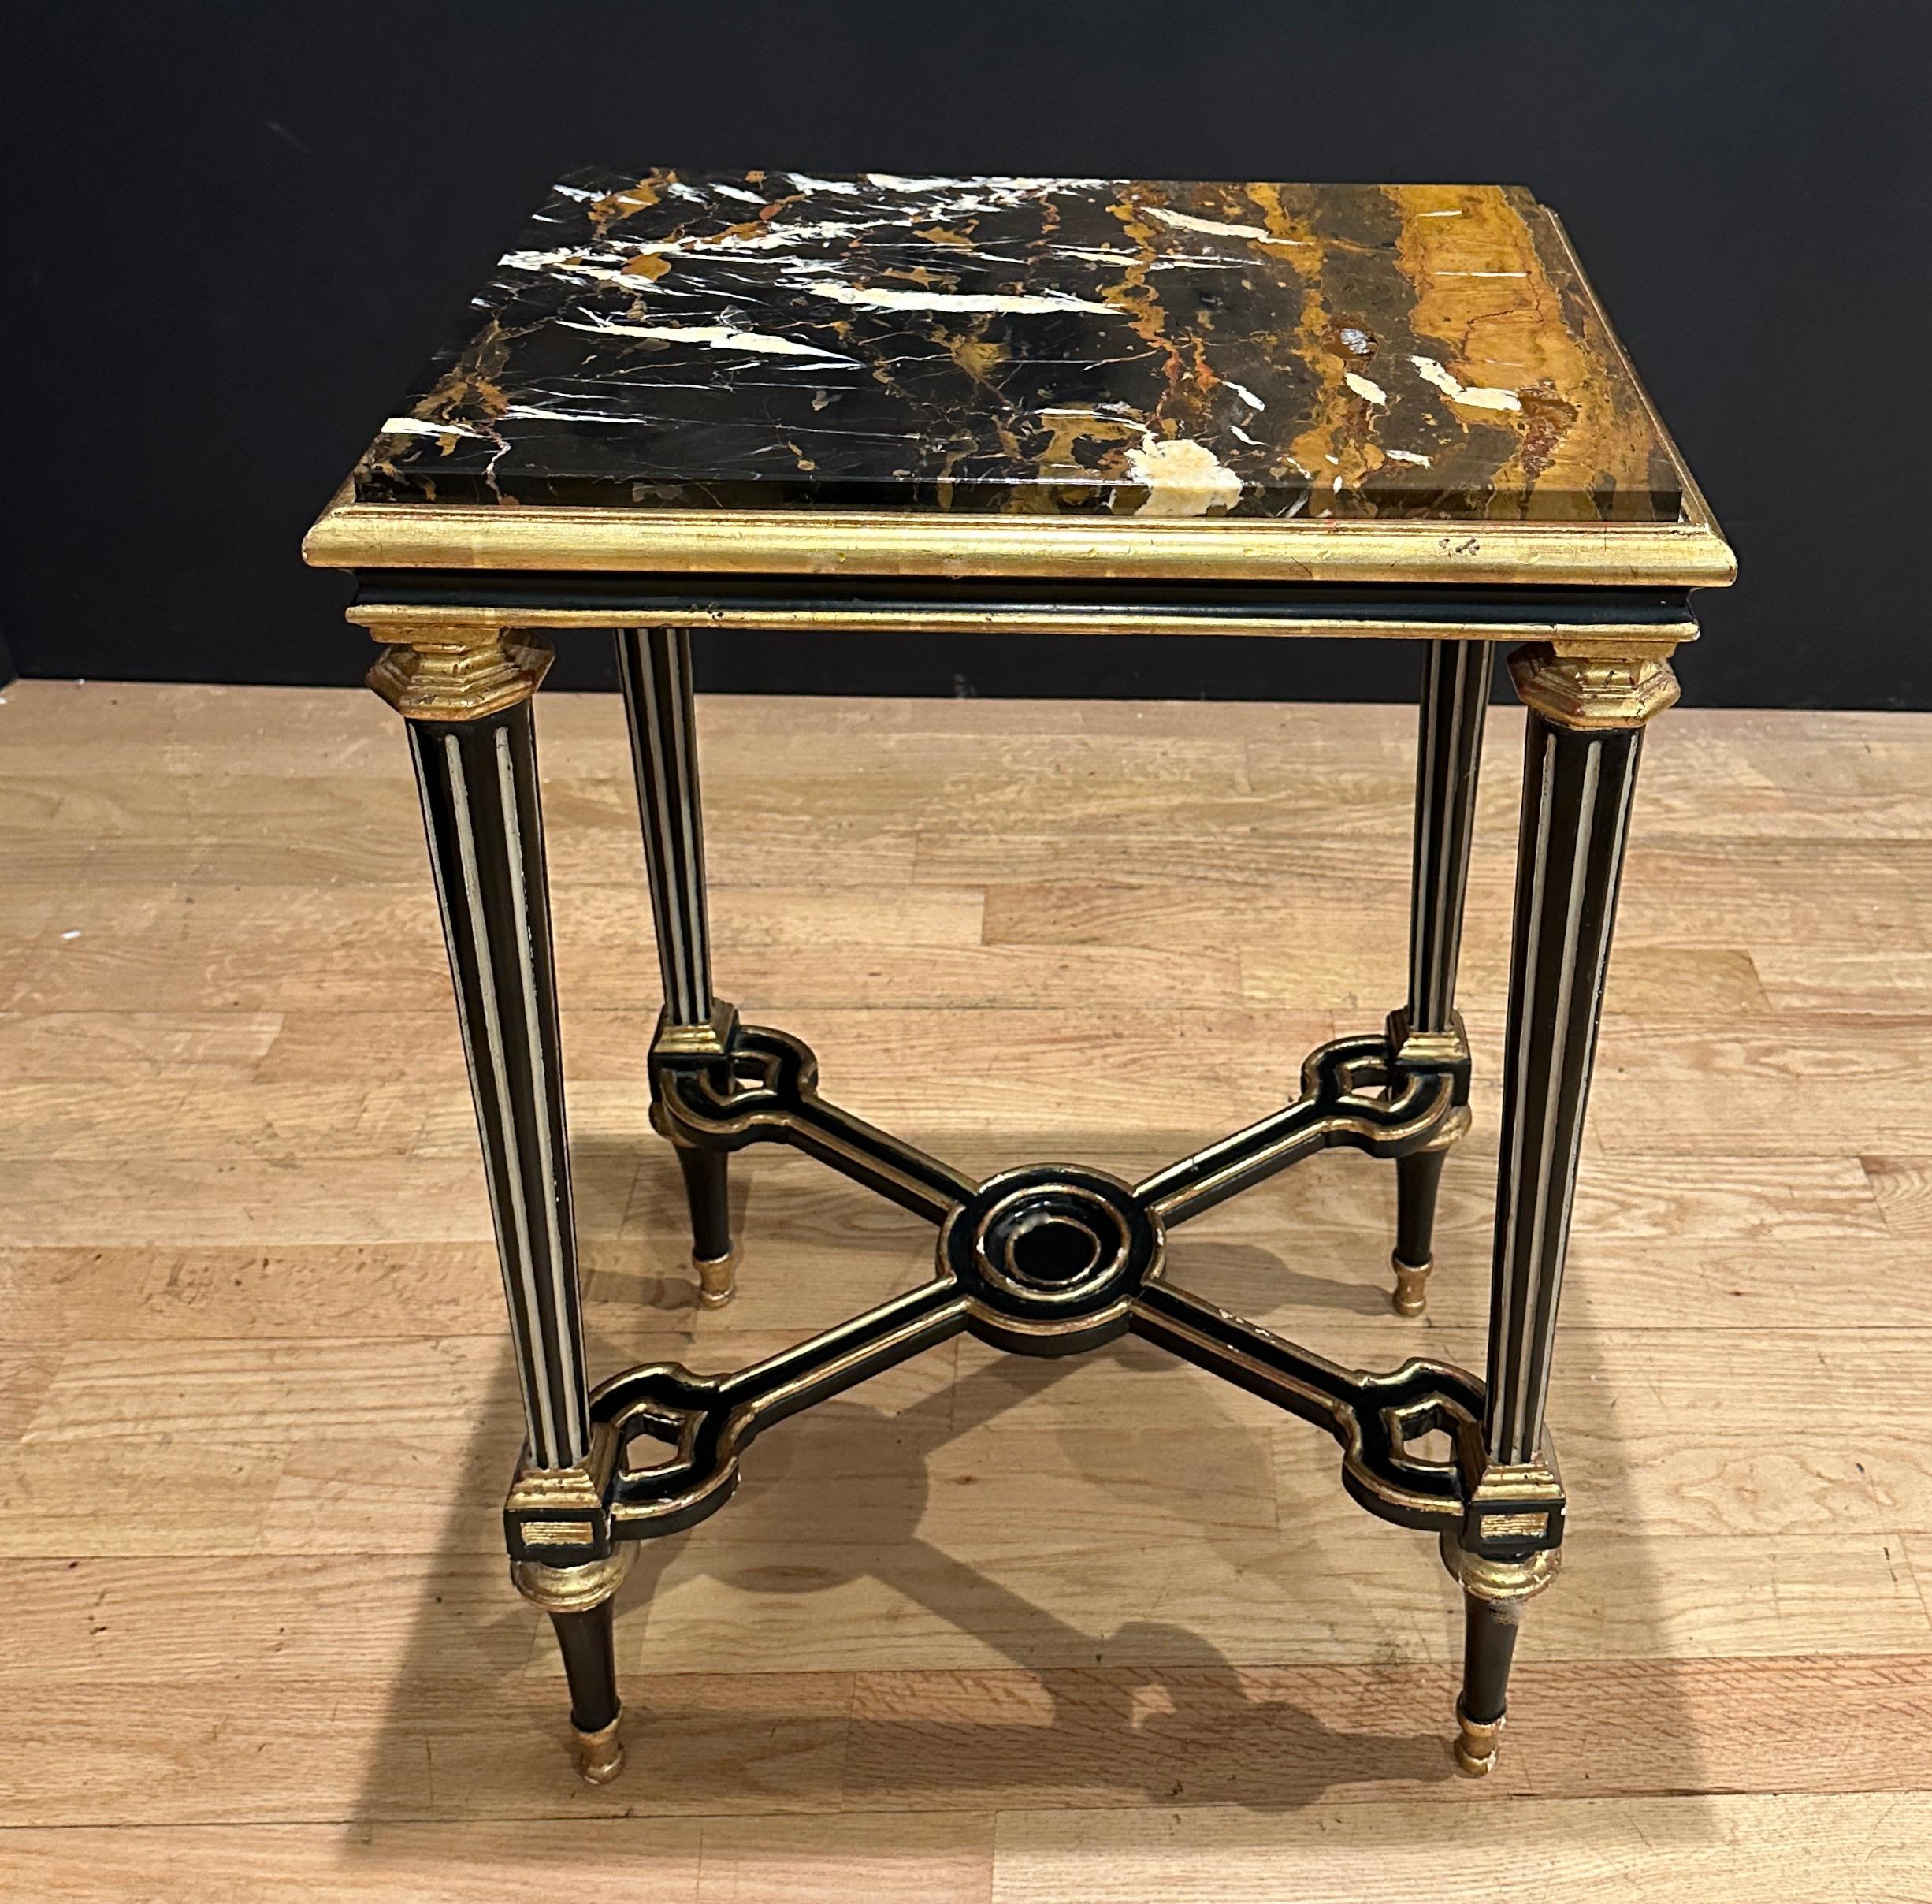 Gilt and ebonized marble top side table. Unusual black, gold and white merle top. Tapered and fluted carved legs with an X- form stretcher.